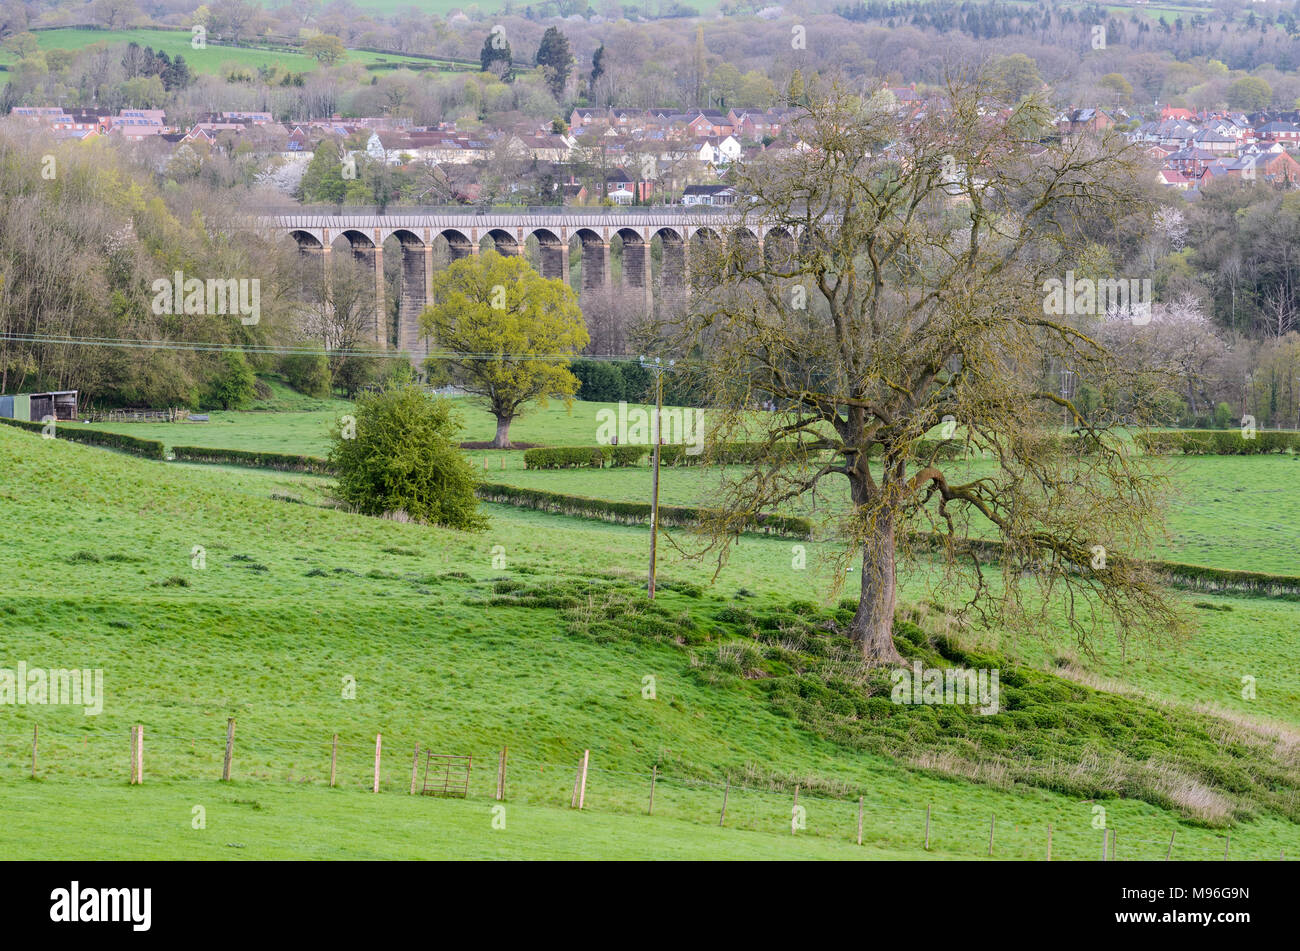 The Pontcysyllte Aqueduct on the Llangollen Canal in Wales Stock Photo